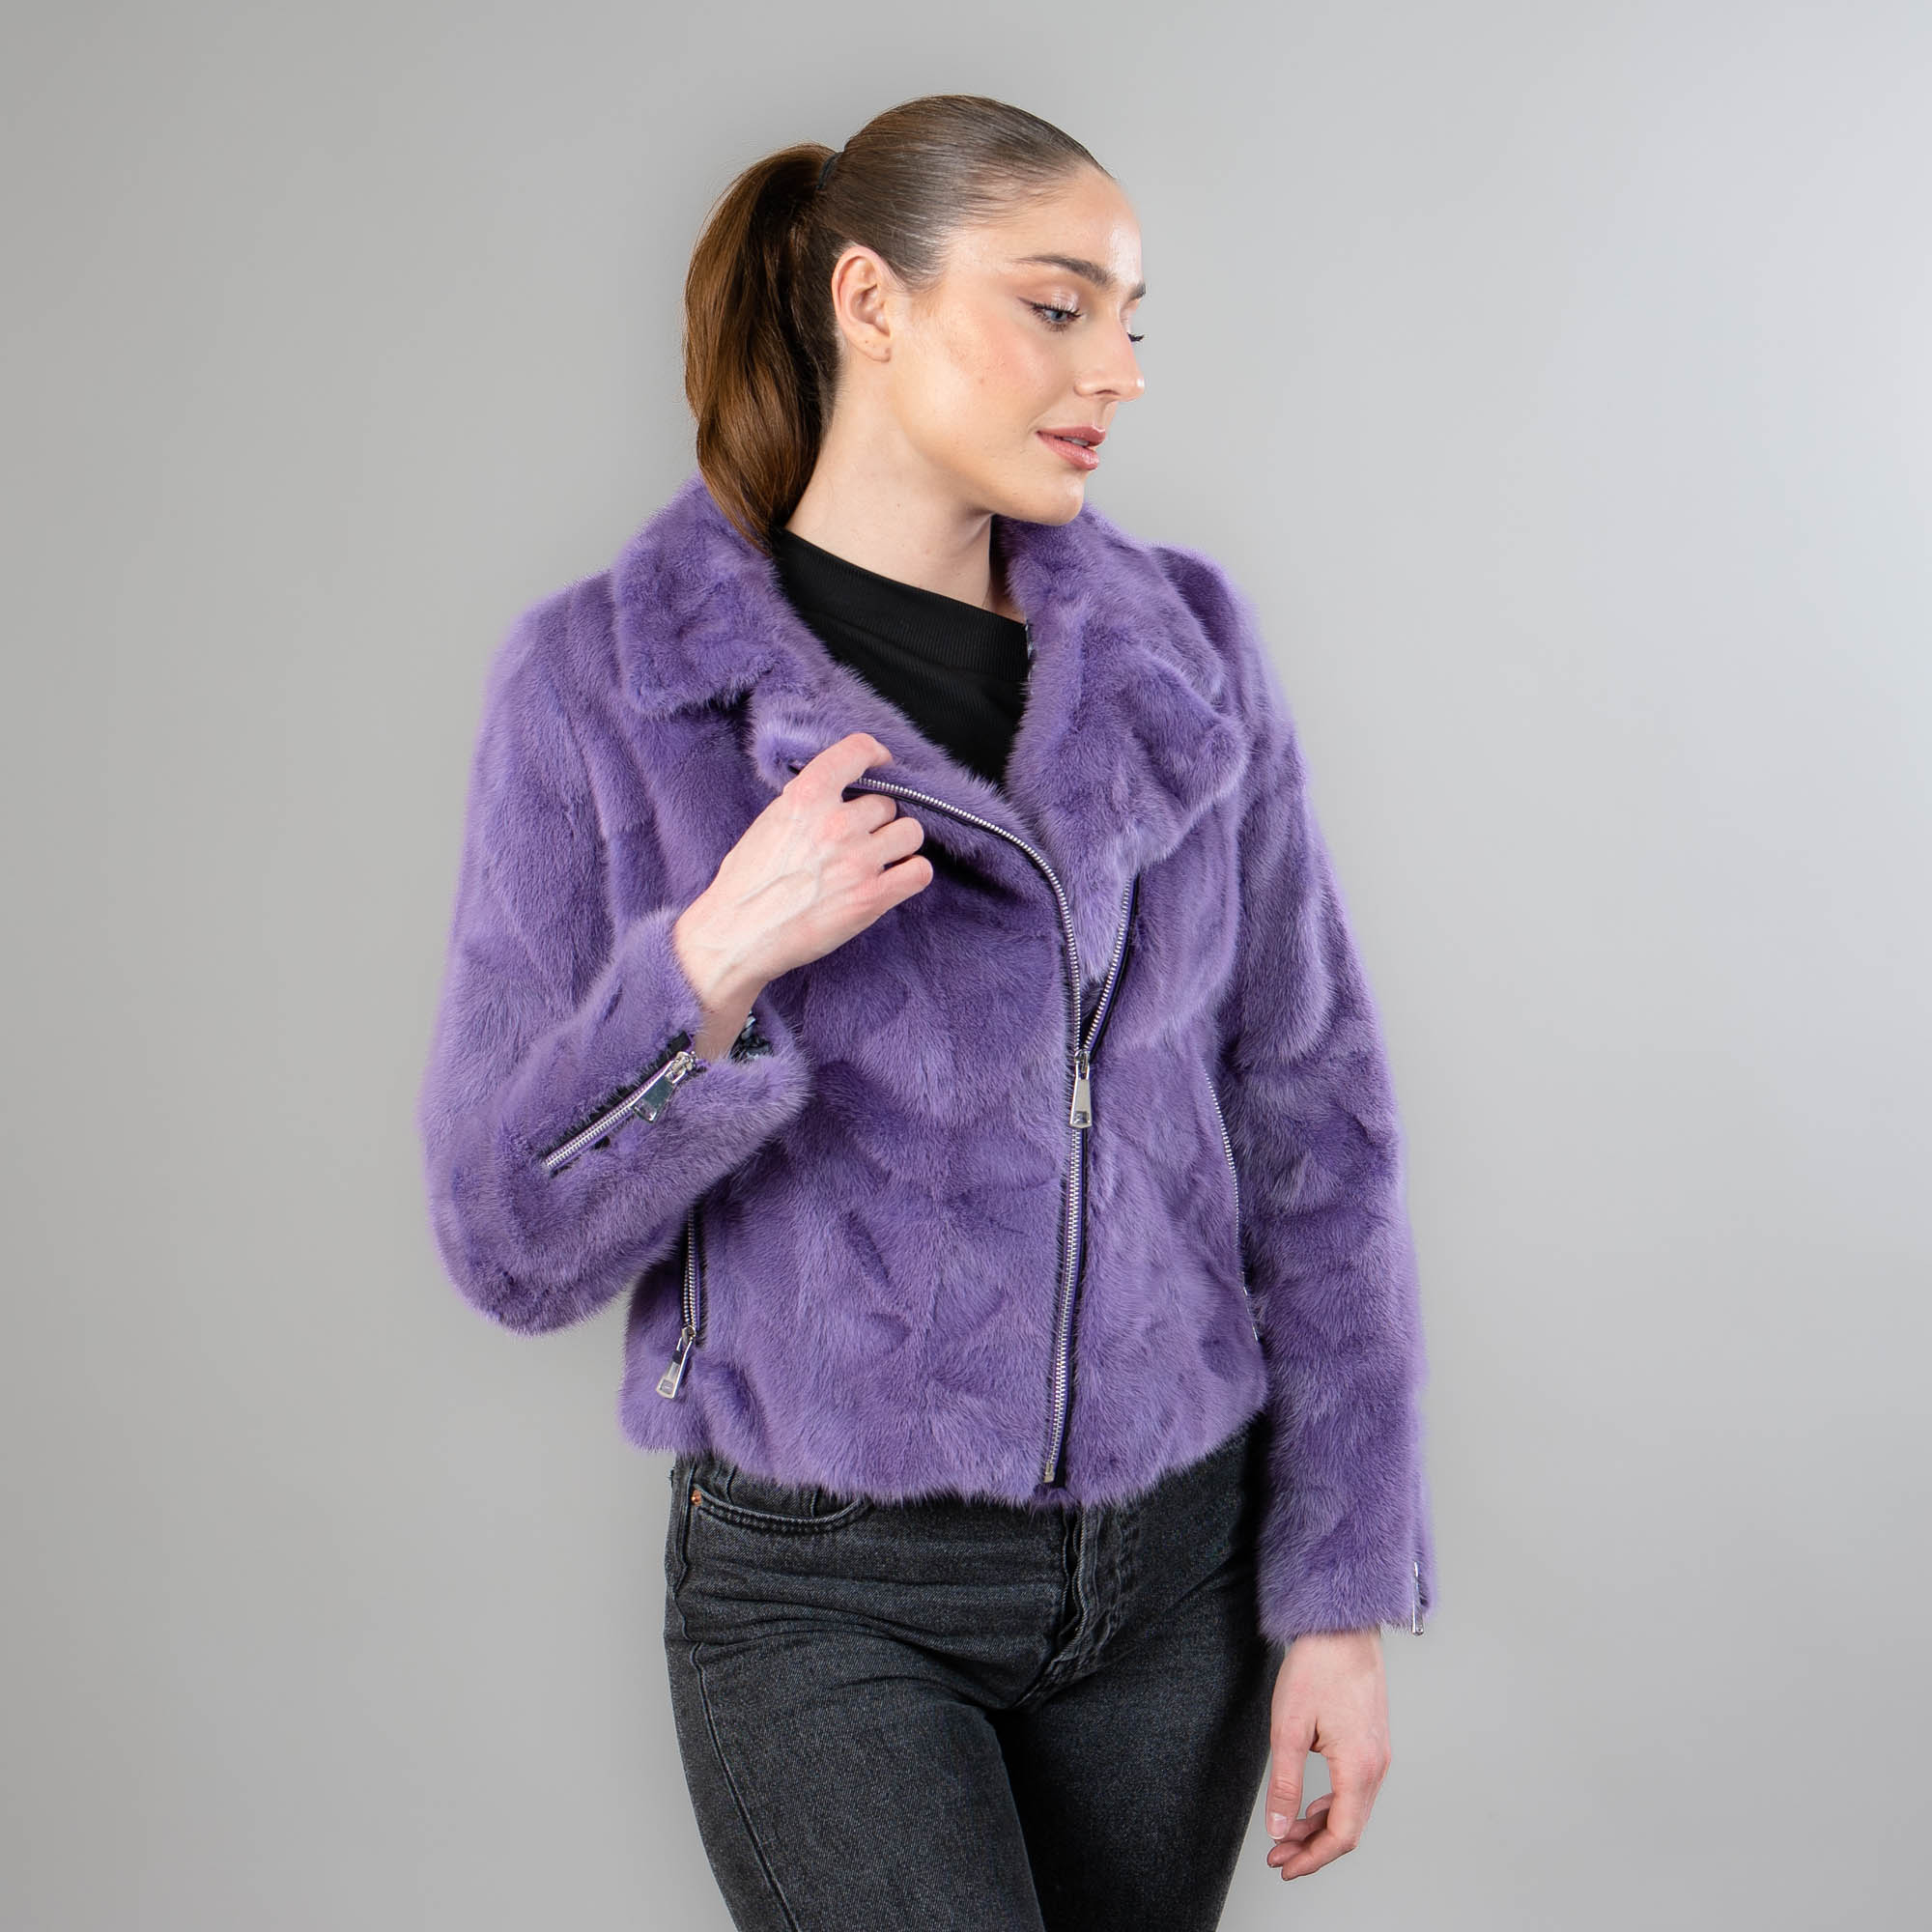 Mink fur jacket with a collar in purple color